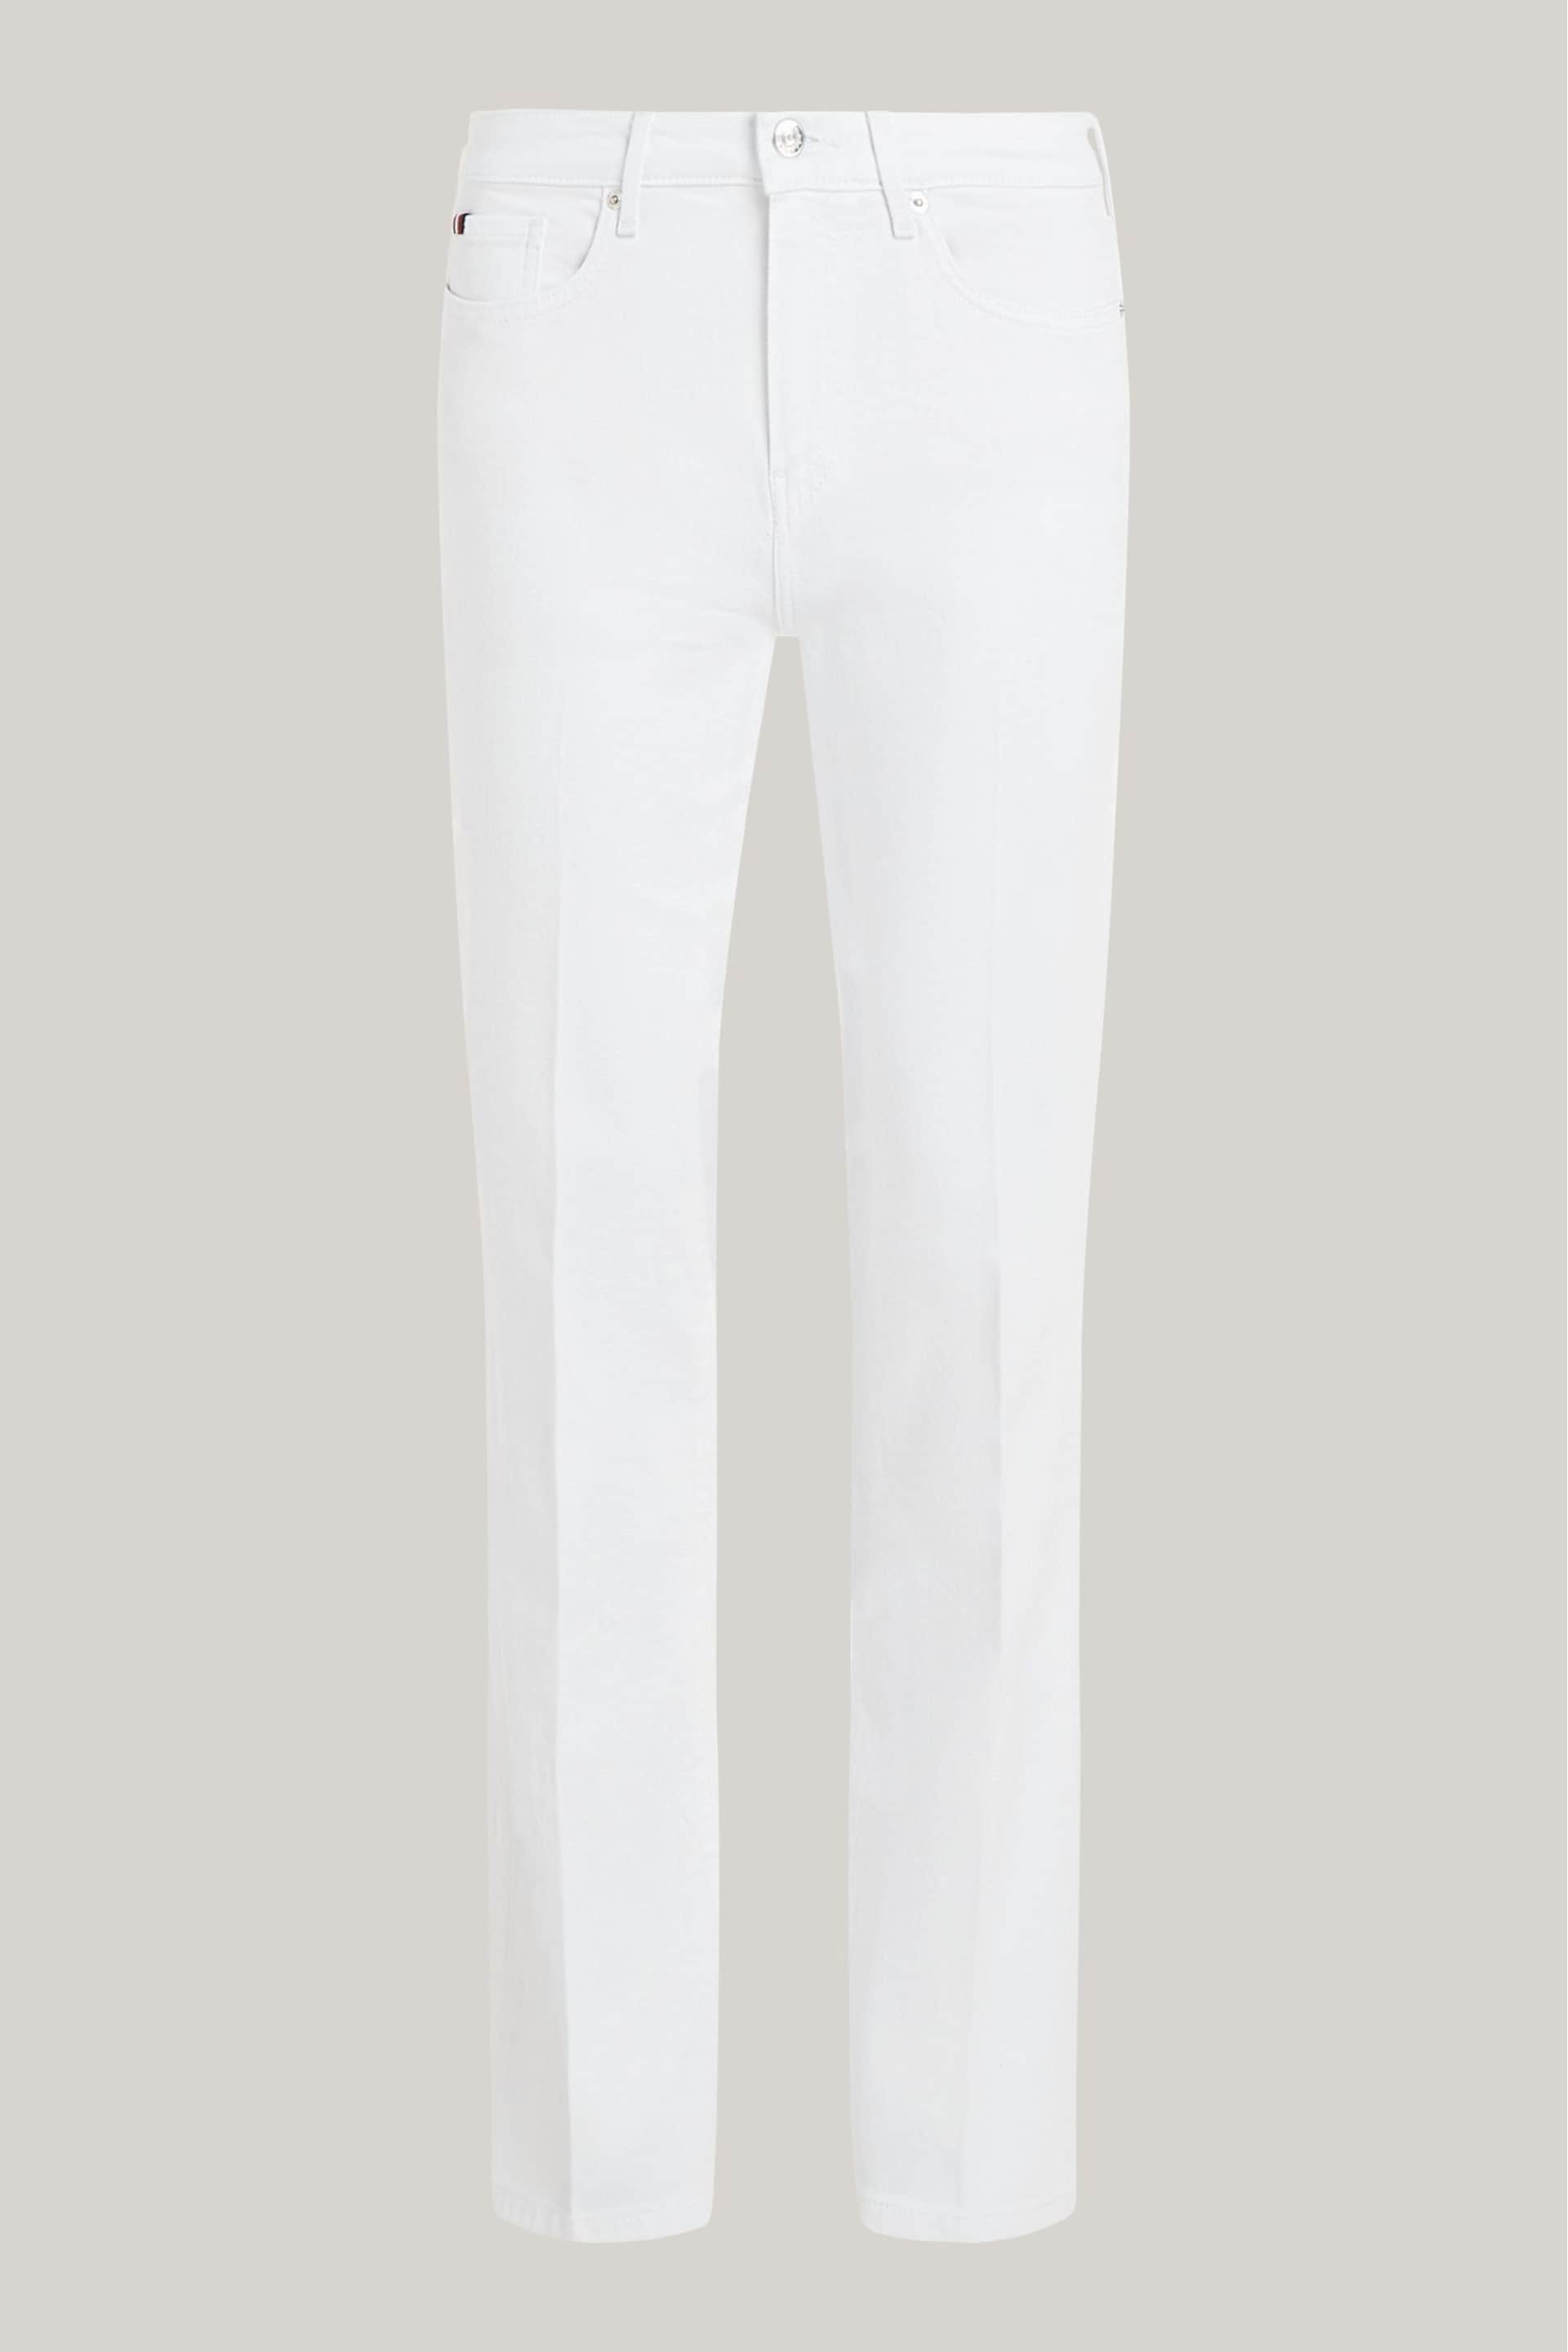 Tommy Hilfiger Bootcut White Jeans - Image 5 of 5